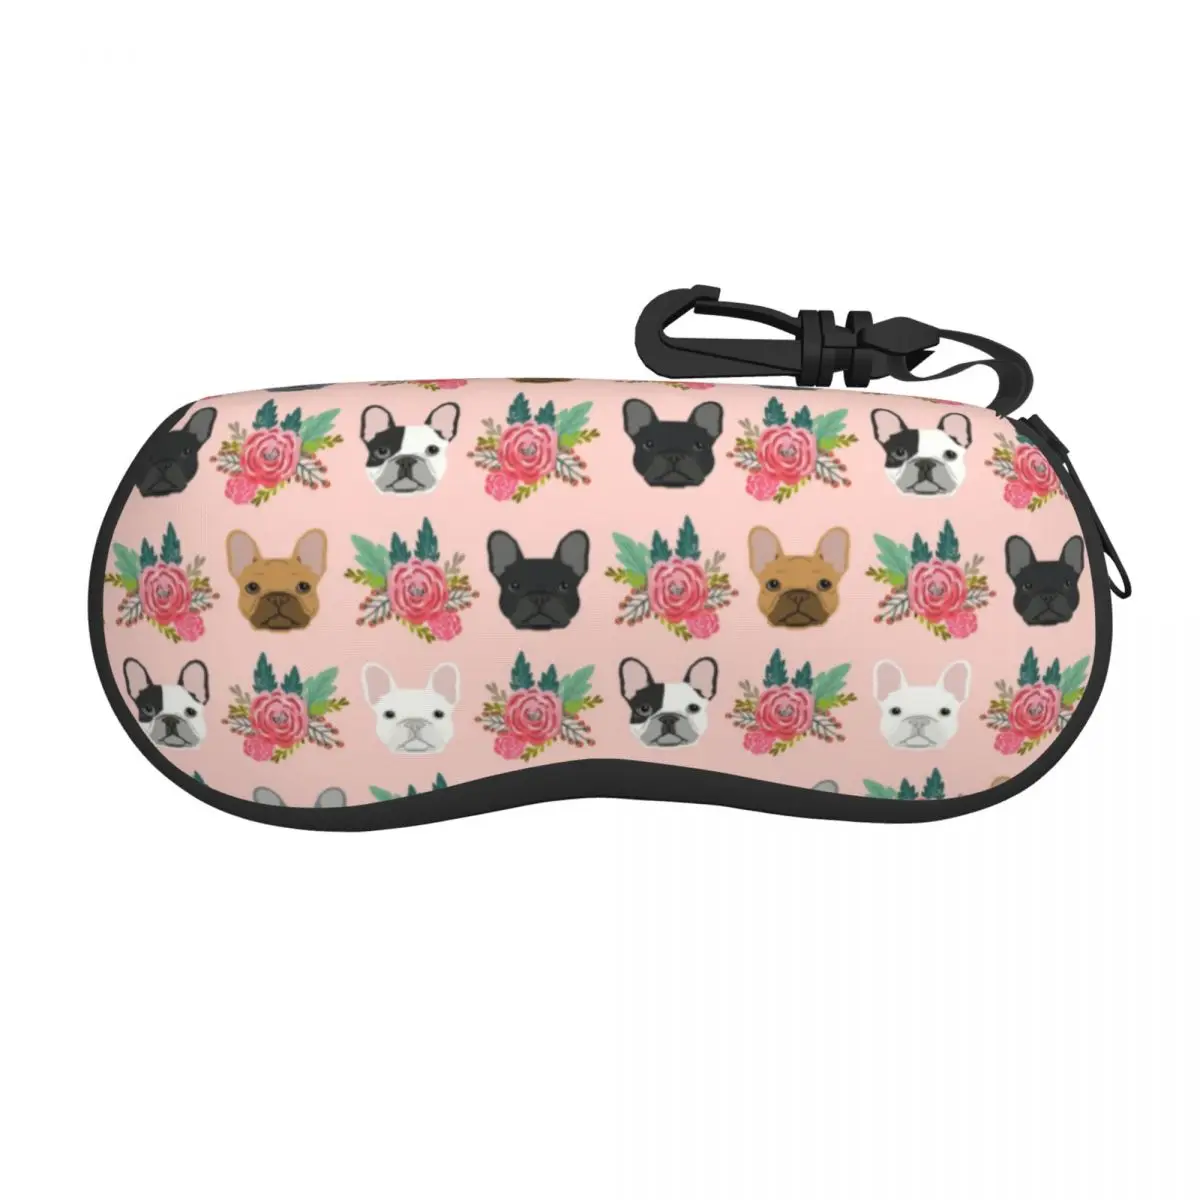 

French Bulldog Faces Pattern Pink Cute Dogs Sunglasses Soft Case Neoprene Zipper Shell Eyeglass Case Protective Box For Glasses